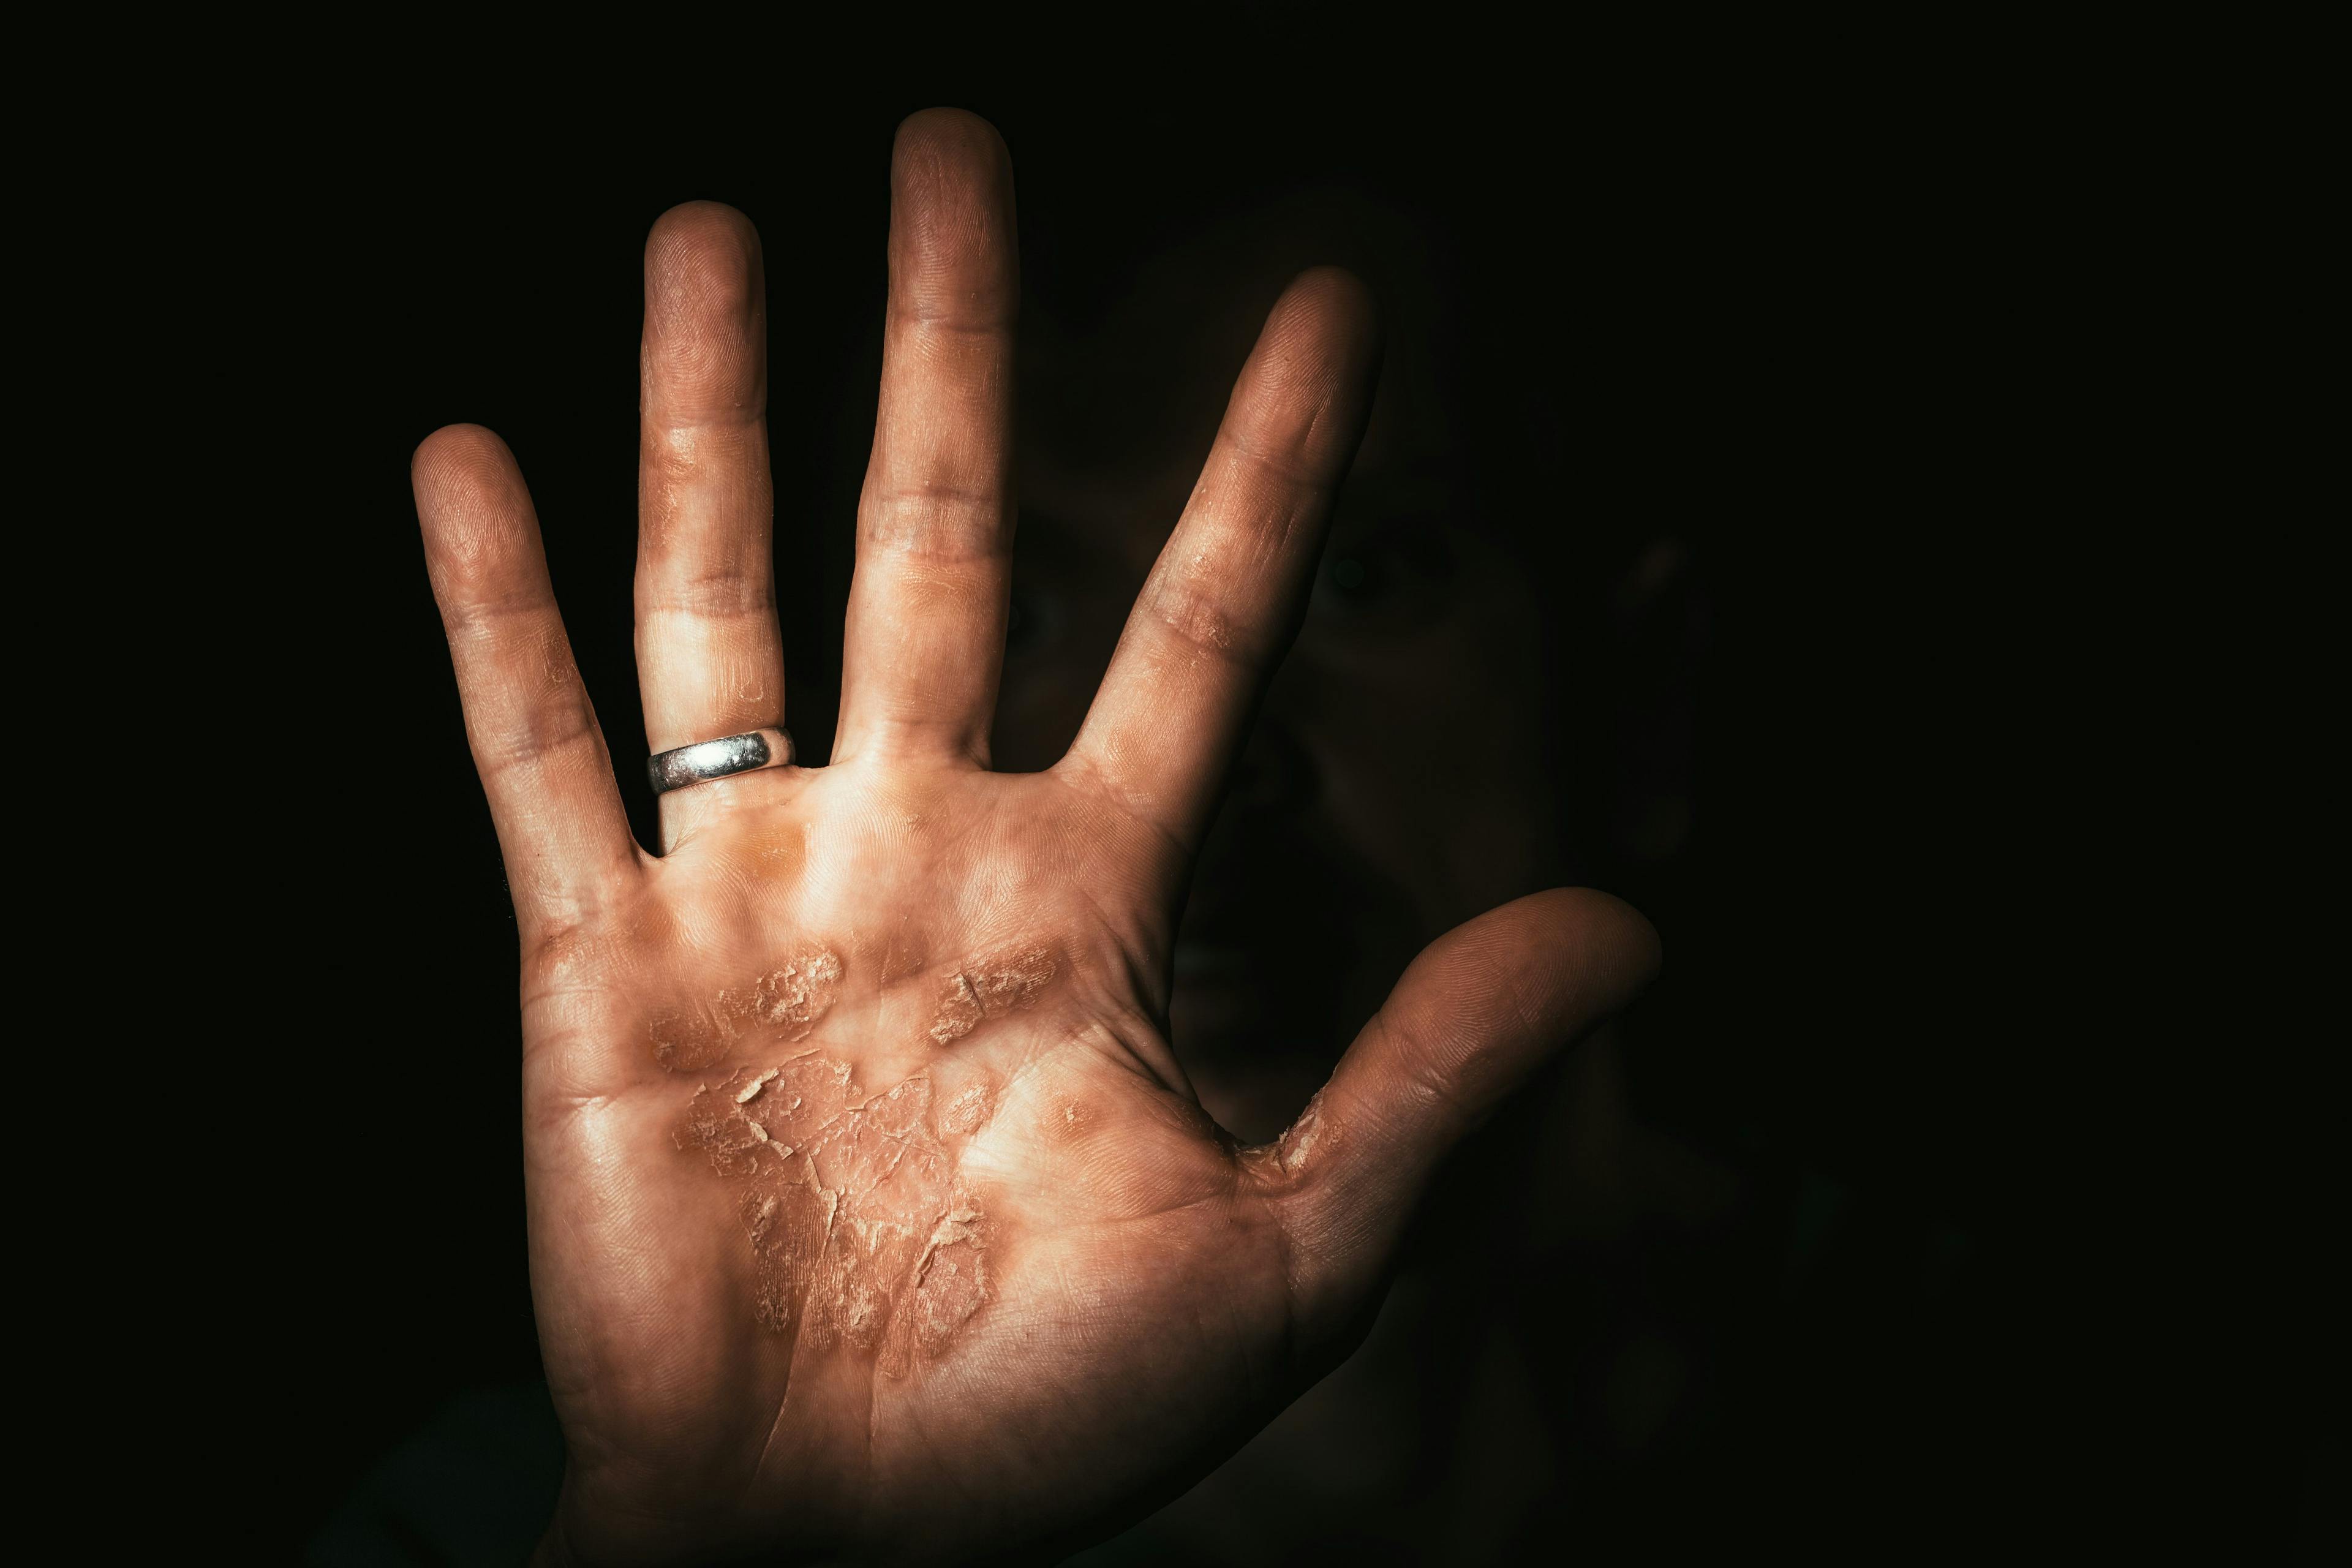 dark hand of a worker with b calluses protests. Stop | Image Credit:vovan - stock.adobe.com